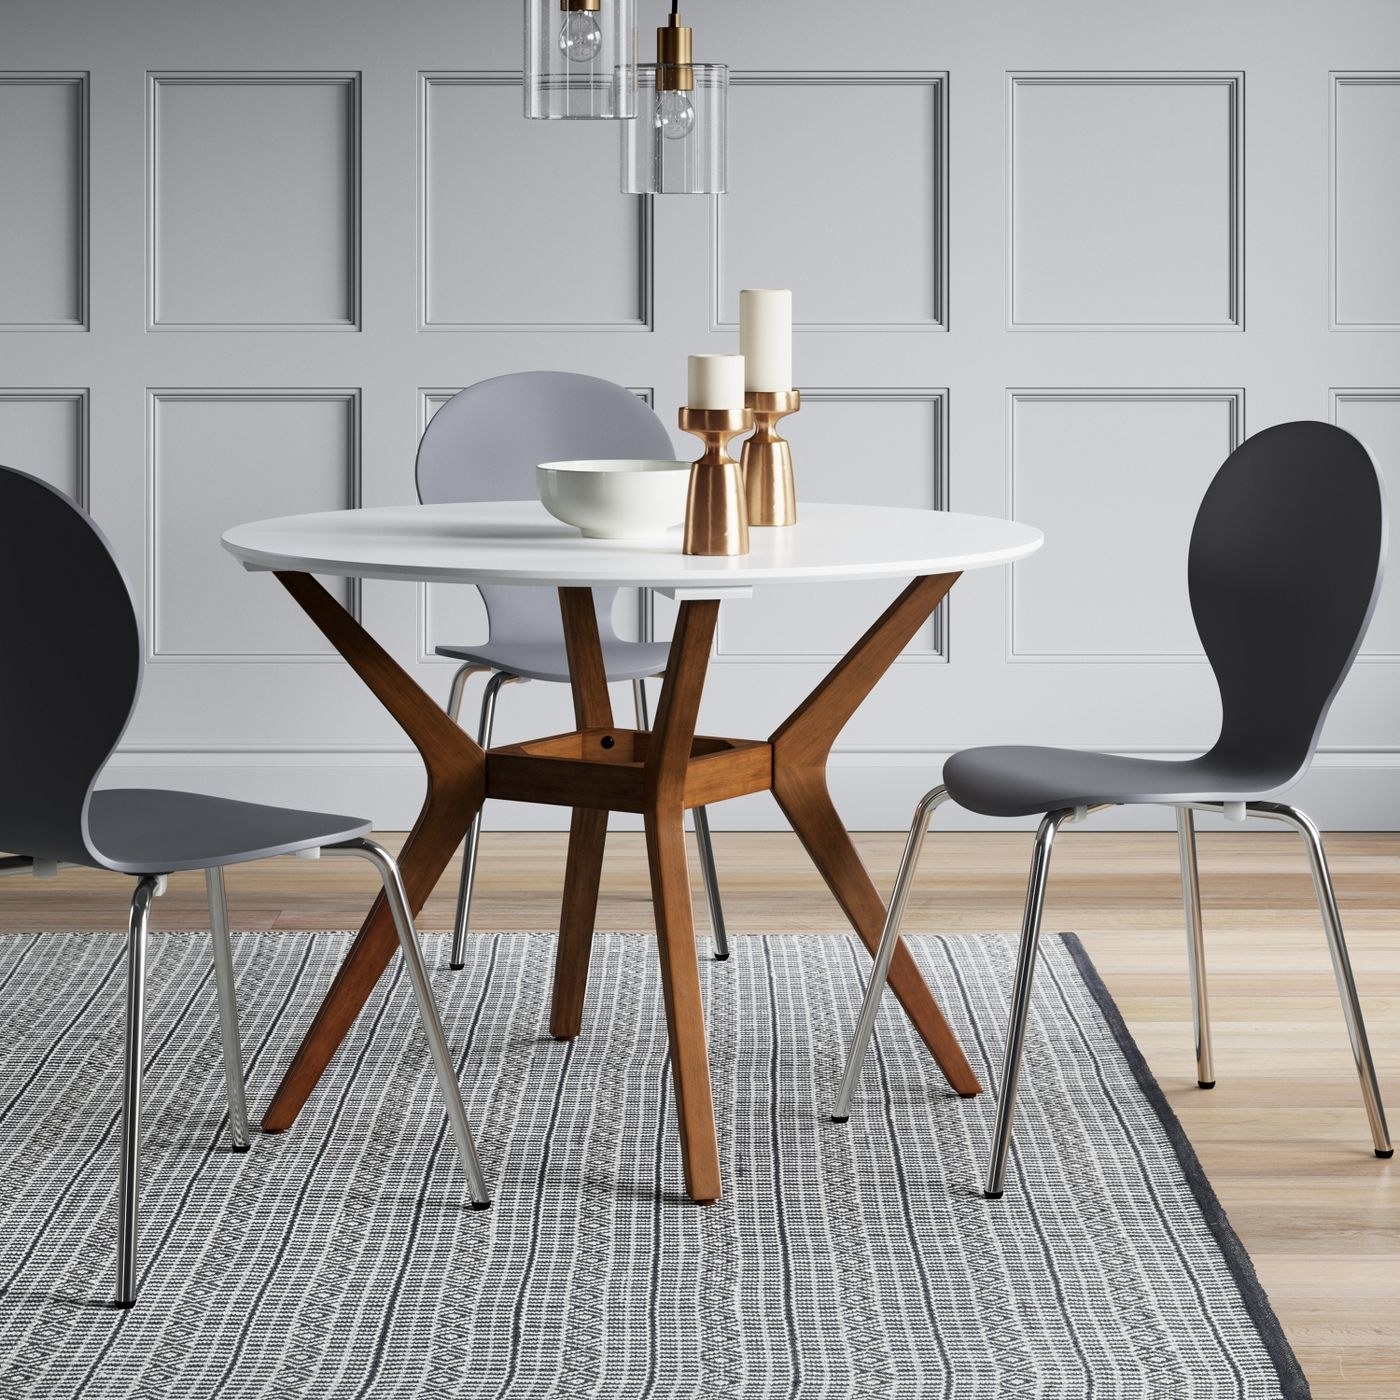 The white table with natural wood legs